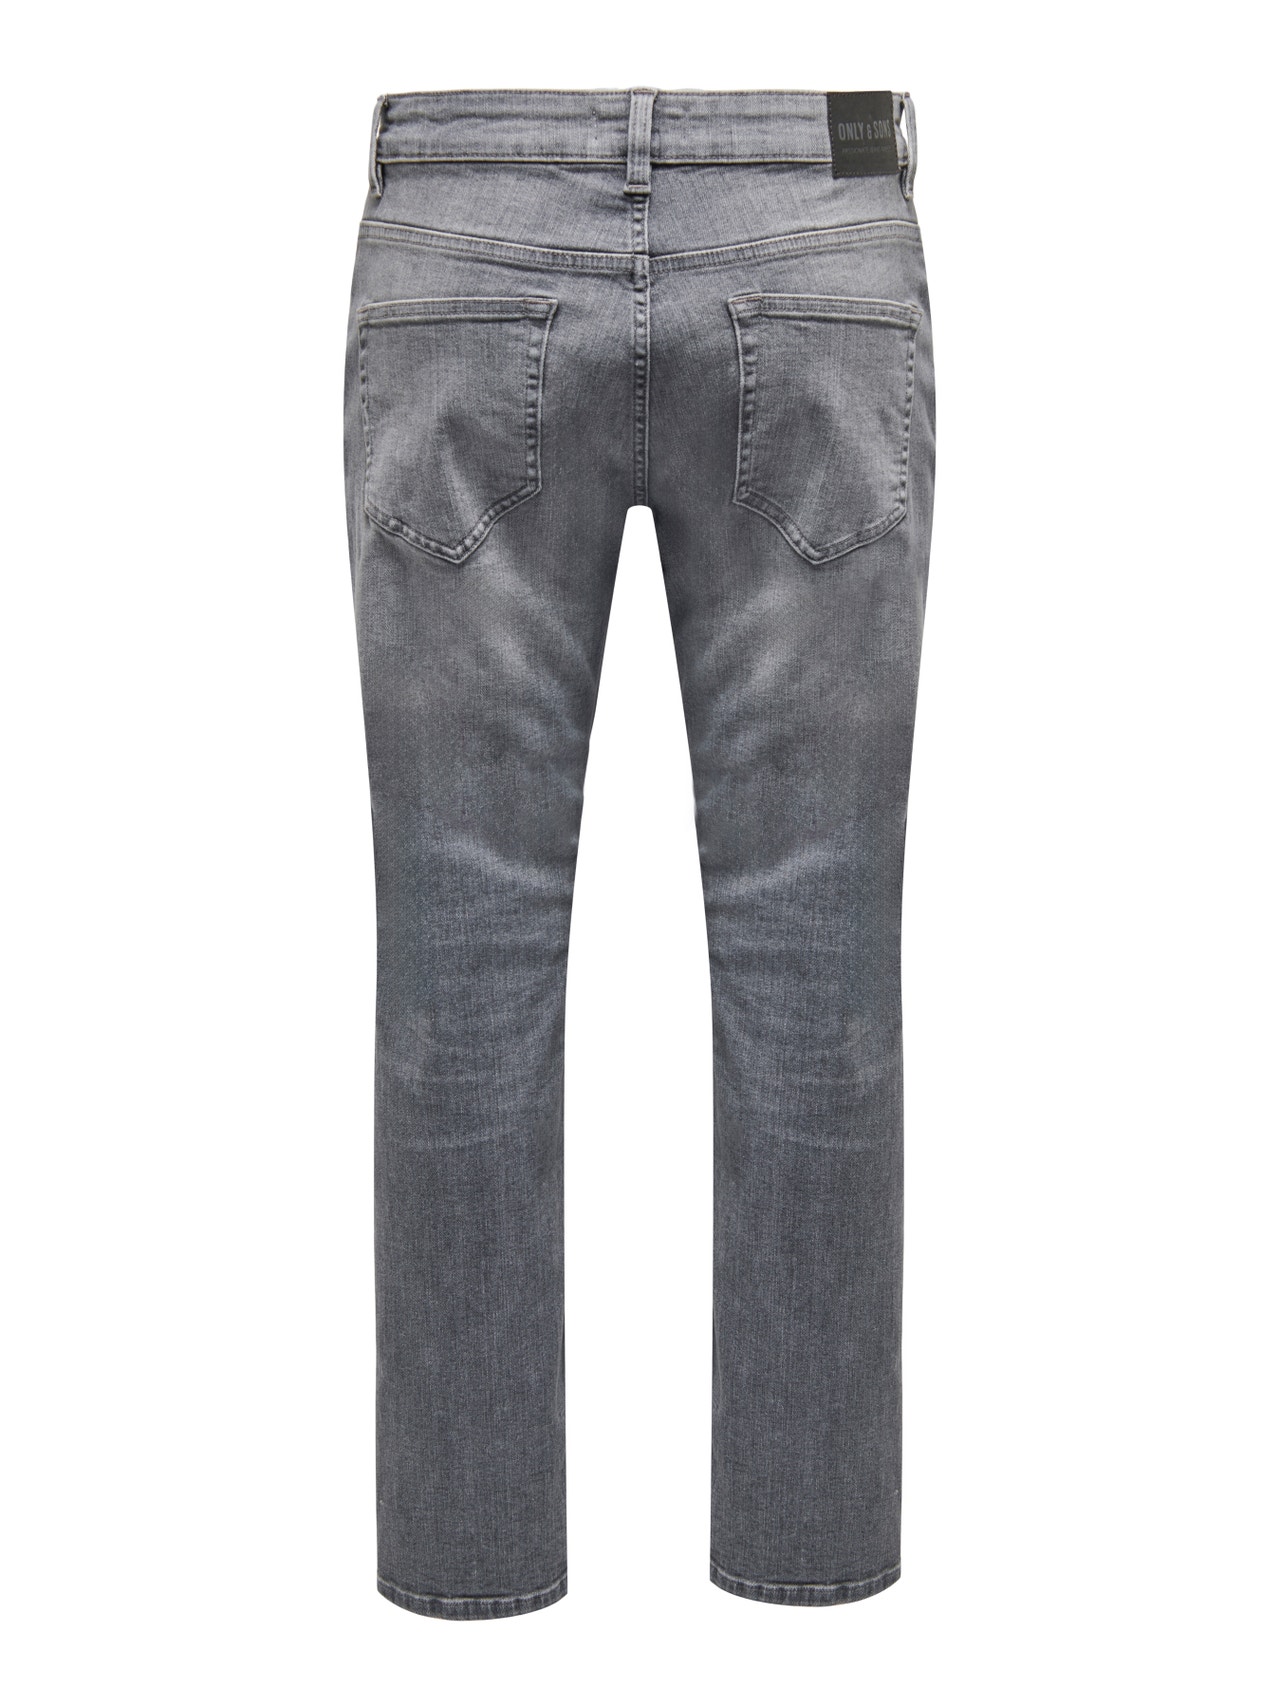 ONLY & SONS Jeans Regular Fit Taille moyenne -Medium Grey Denim - 22027572